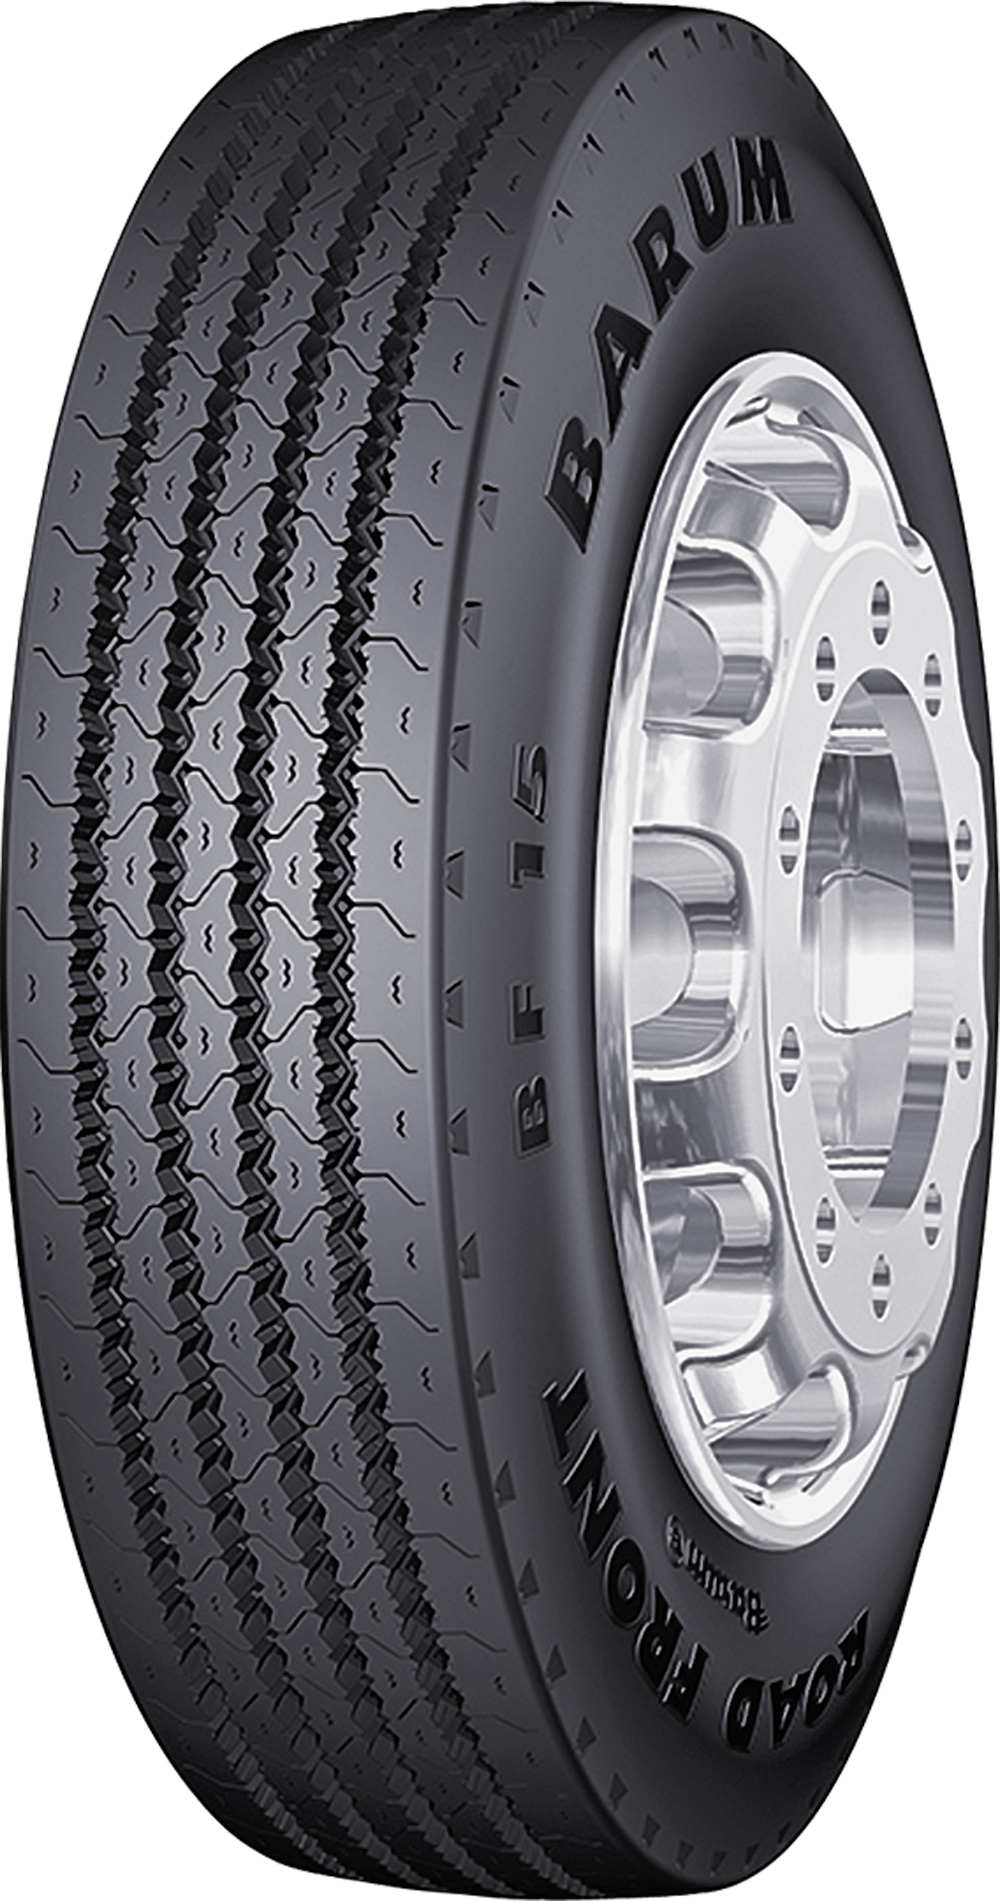 product_type-heavy_tires BARUM BF15 265/70 R19.5 140M